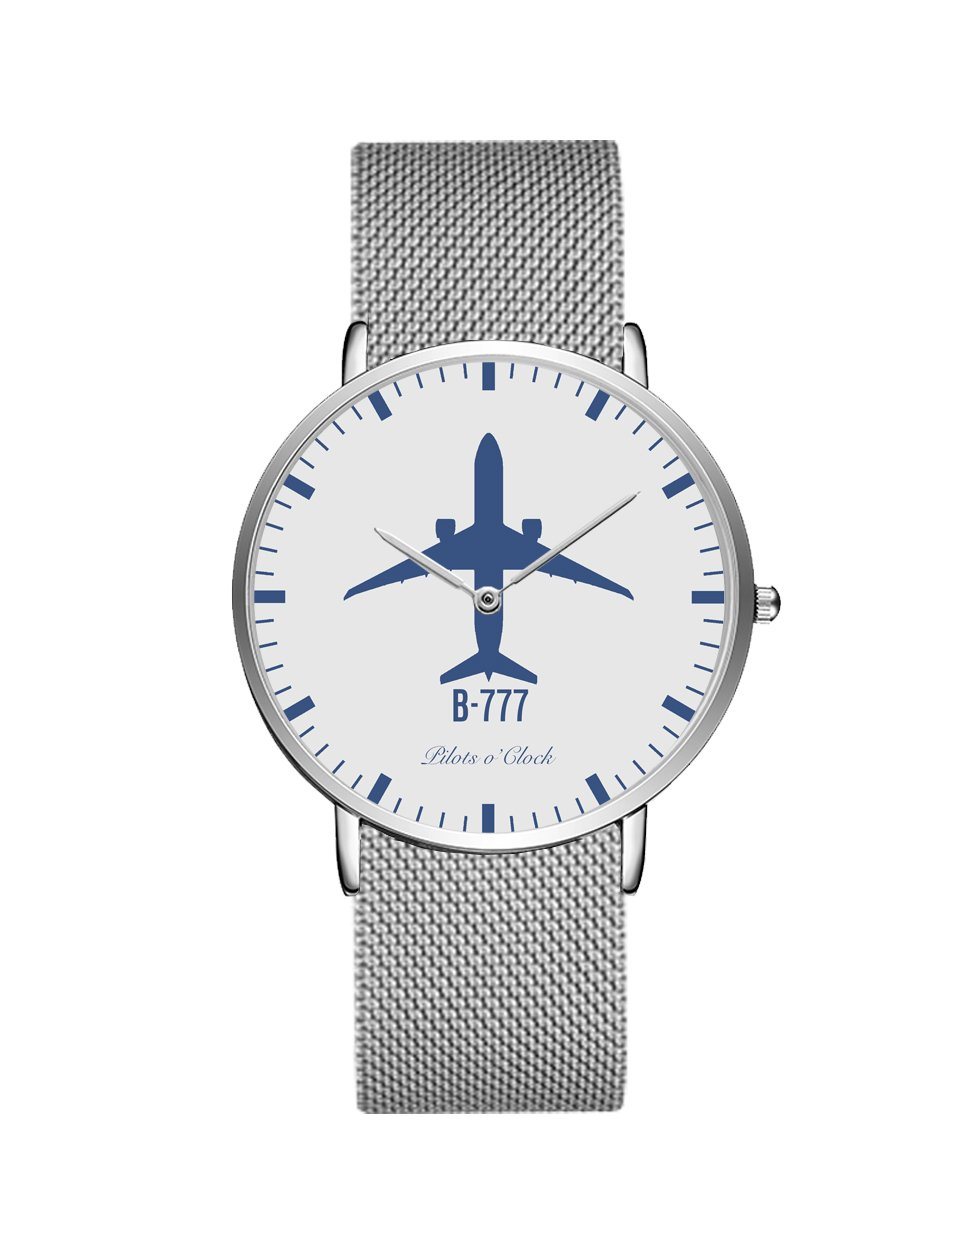 Boeing 777 Stainless Steel Strap Watches Pilot Eyes Store Silver & Silver Stainless Steel Strap 